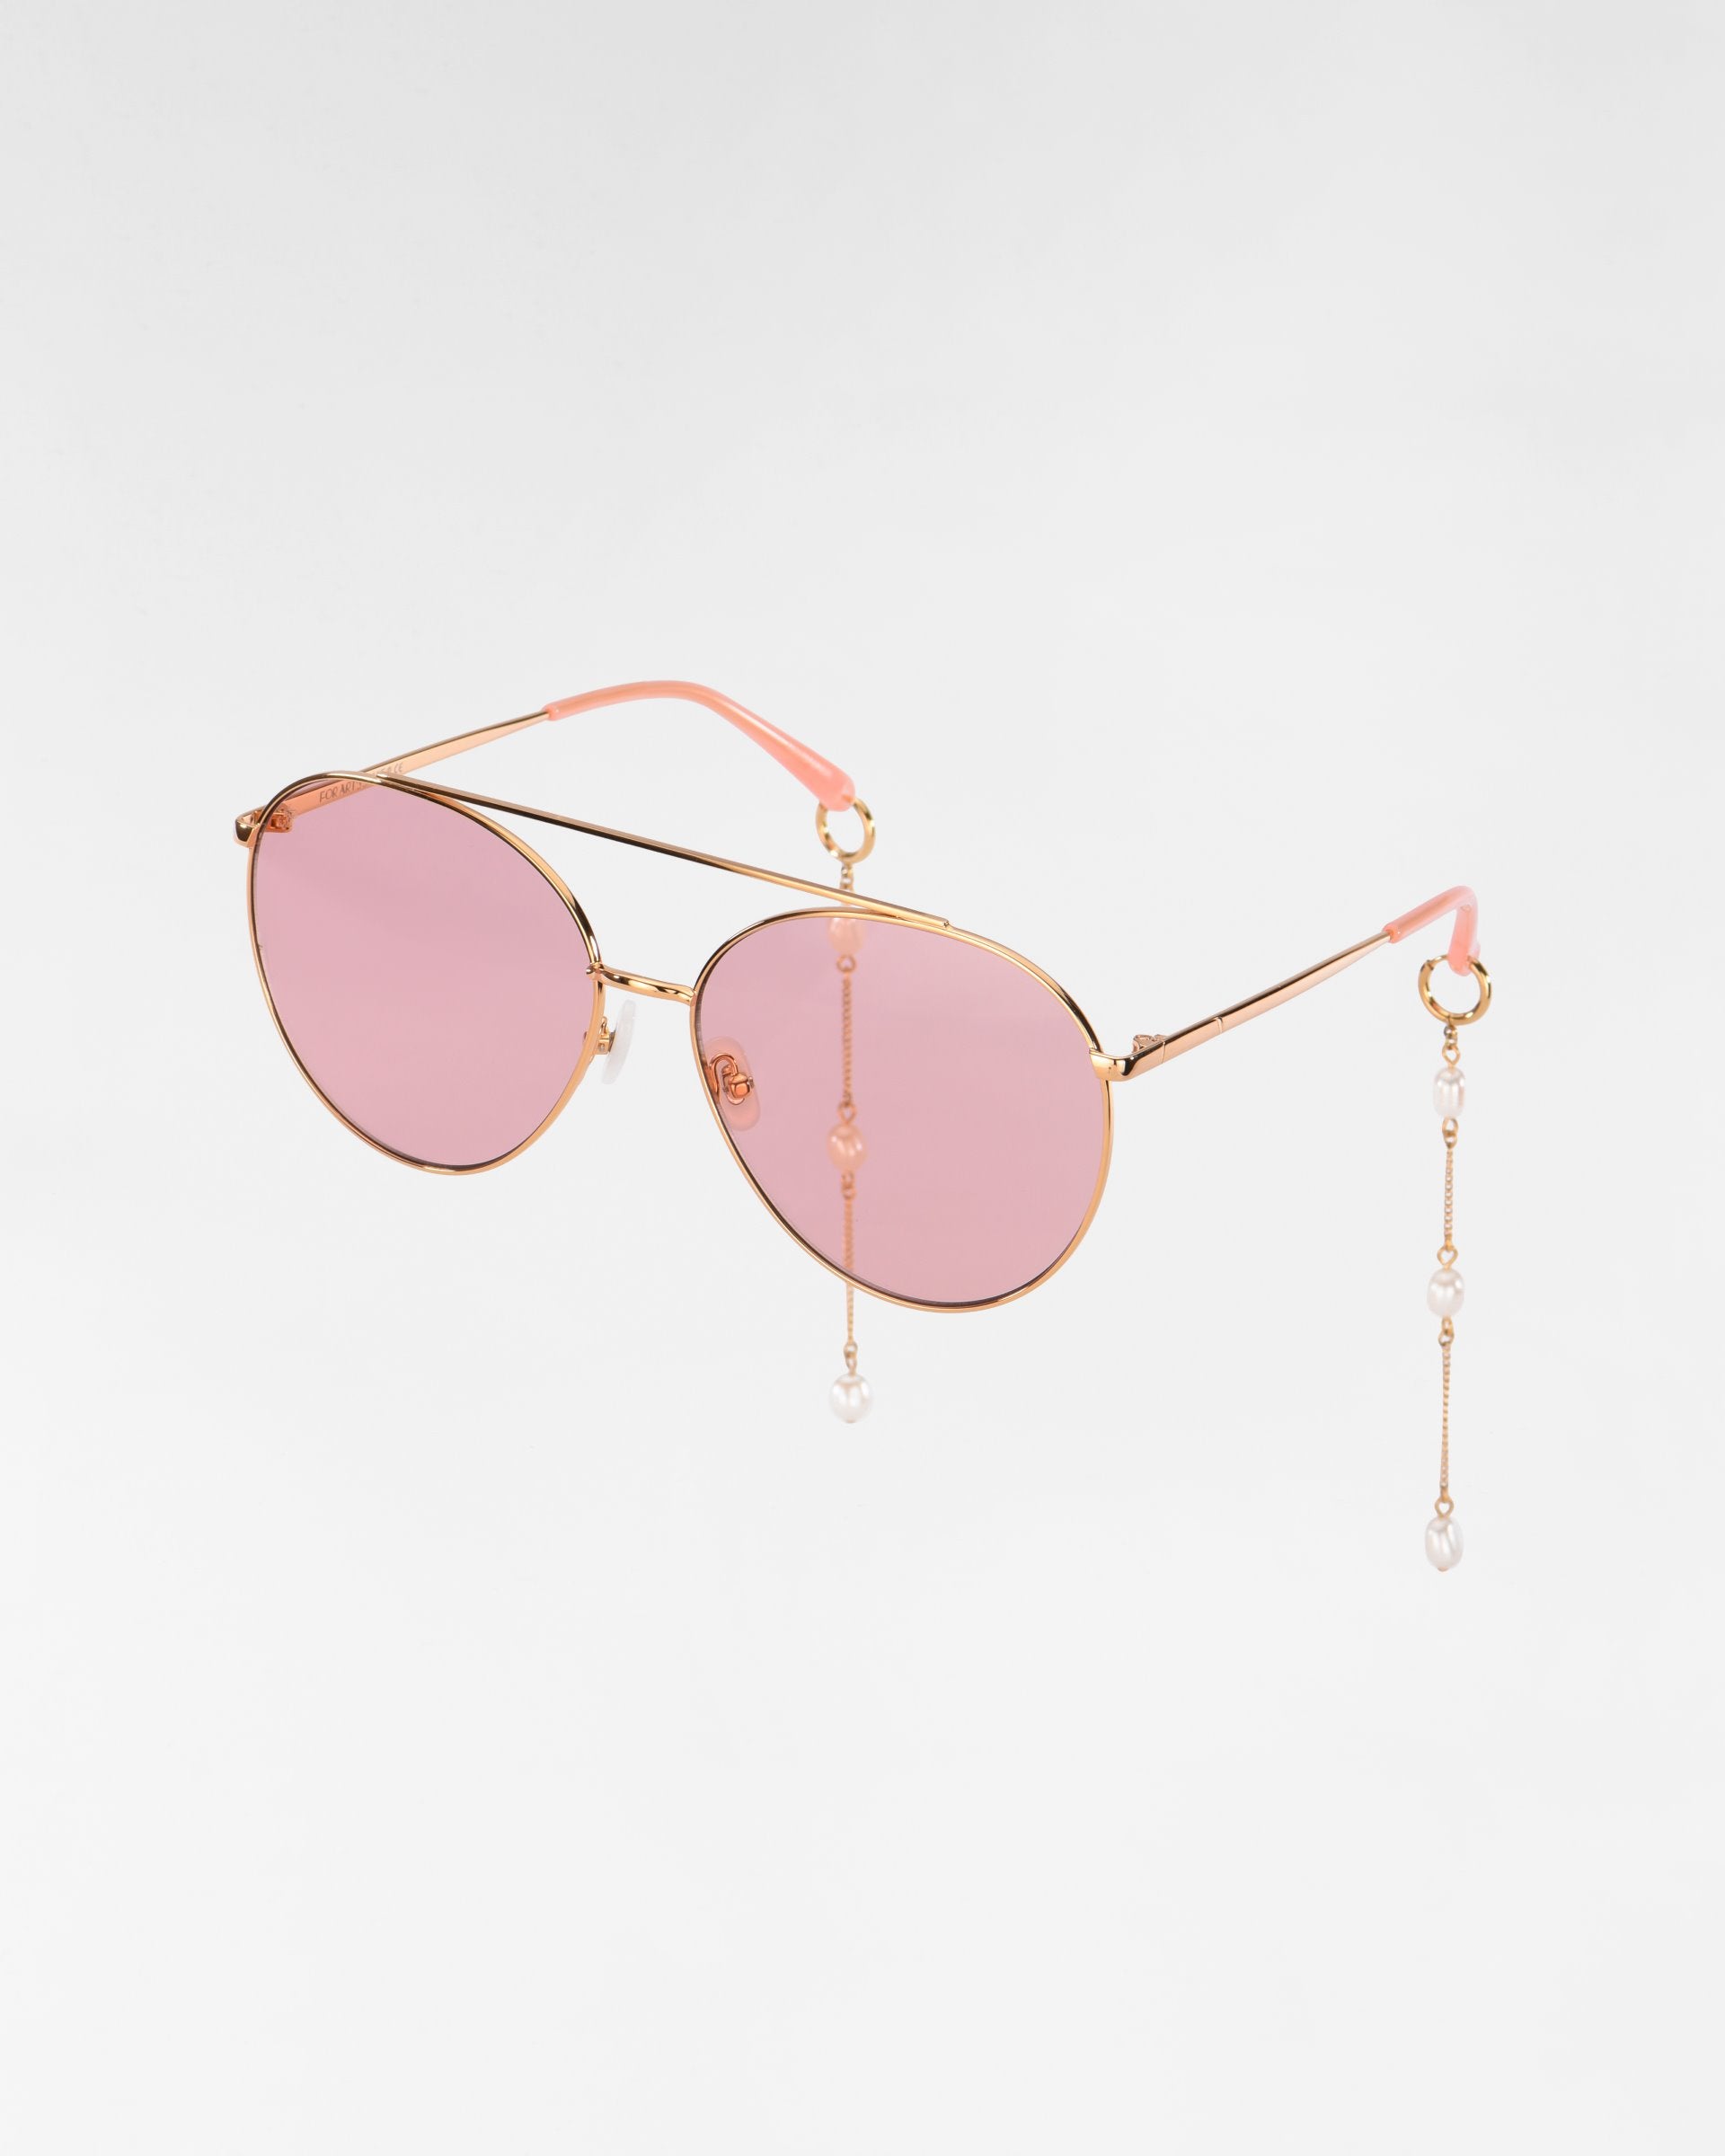 Yoyo by For Art&#39;s Sake®: Gold-framed aviator sunglasses with pink-tinted lenses, adorned with delicate freshwater pearl-chains hanging from the arms. The sunglasses have pink accents at the ends of the arms, adding a touch of elegance and style. Featuring 18k gold plating for an extra luxurious finish, against a plain white background.